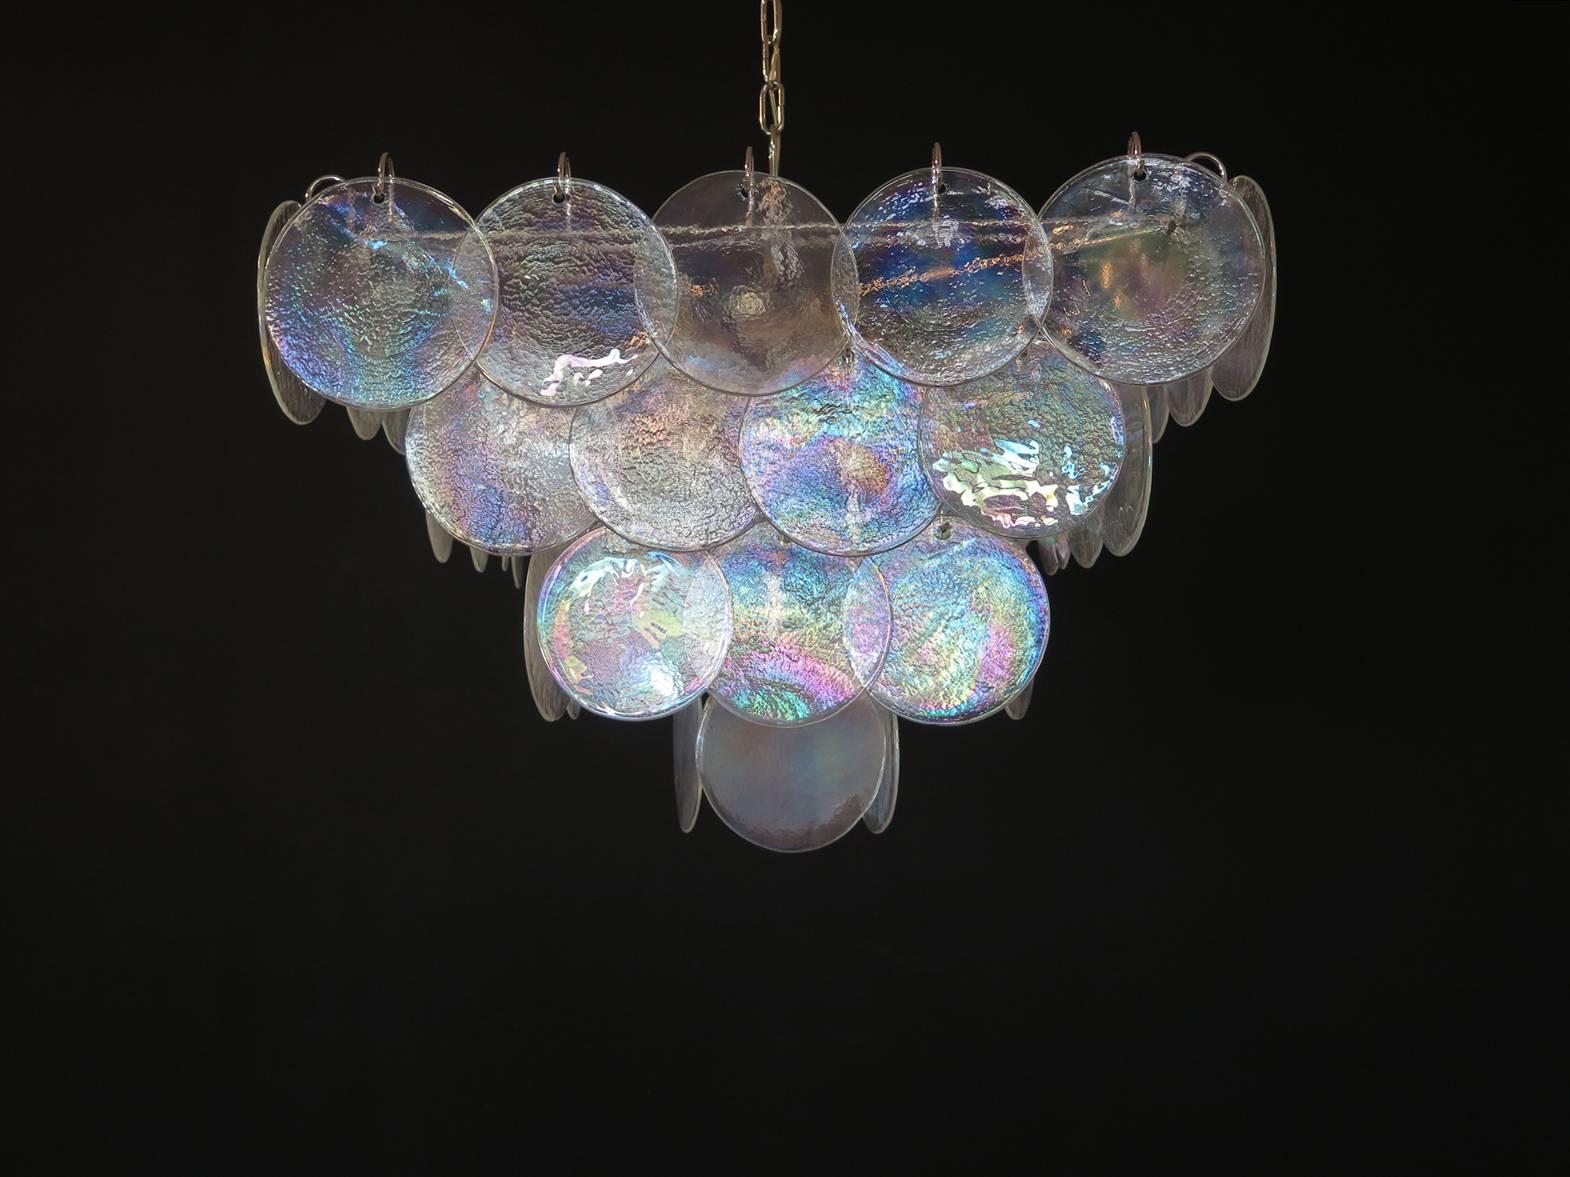 High Quality Murano Chandelier Space Age, Iridescent Glasses 5